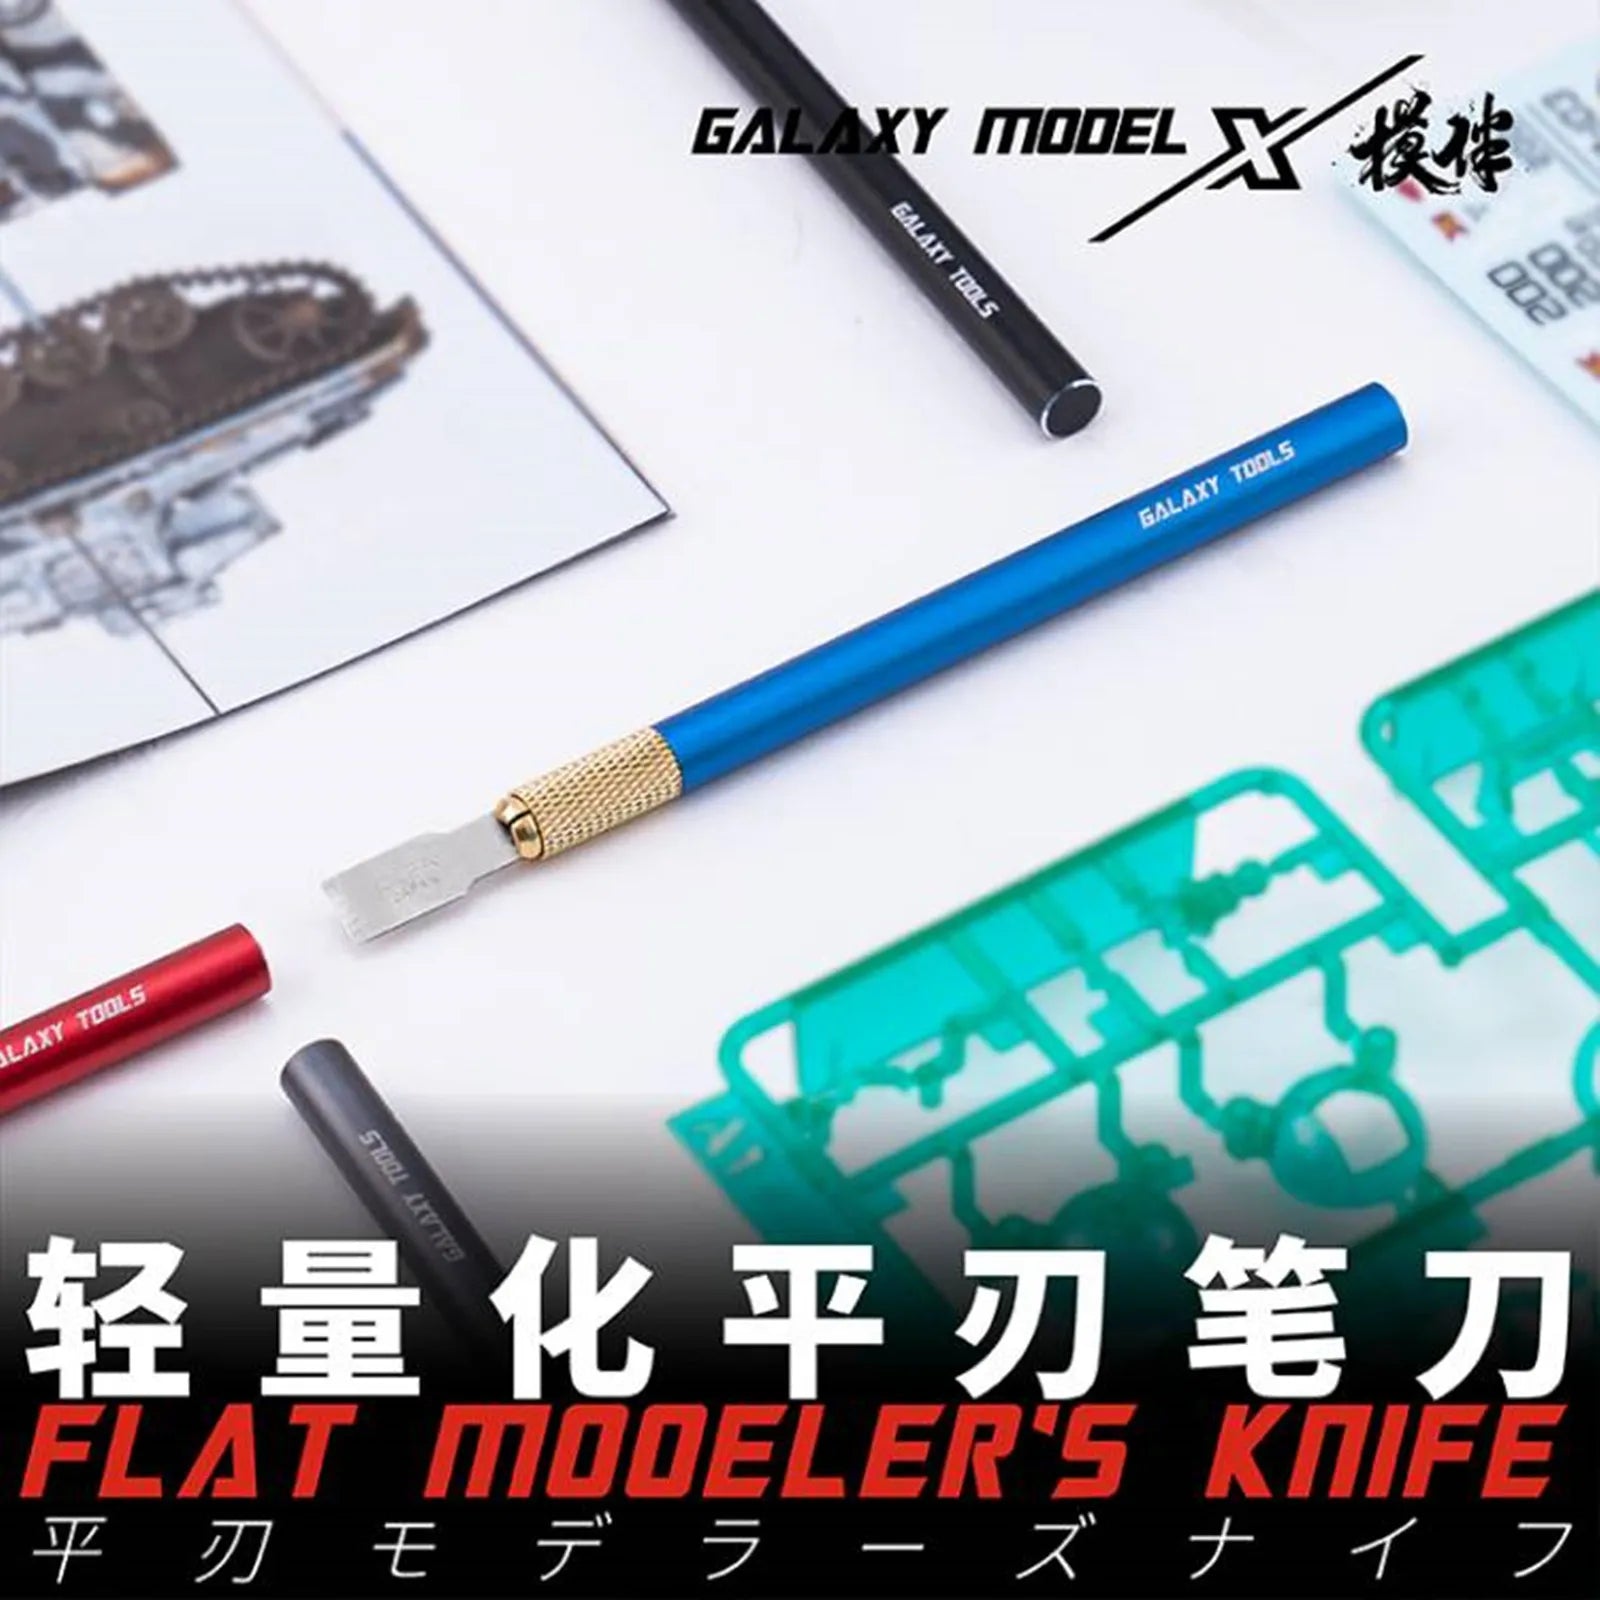 GALAXY Tool T09A Series Flat Modeler's Knife - Precision Tool for Model Kit Assembly